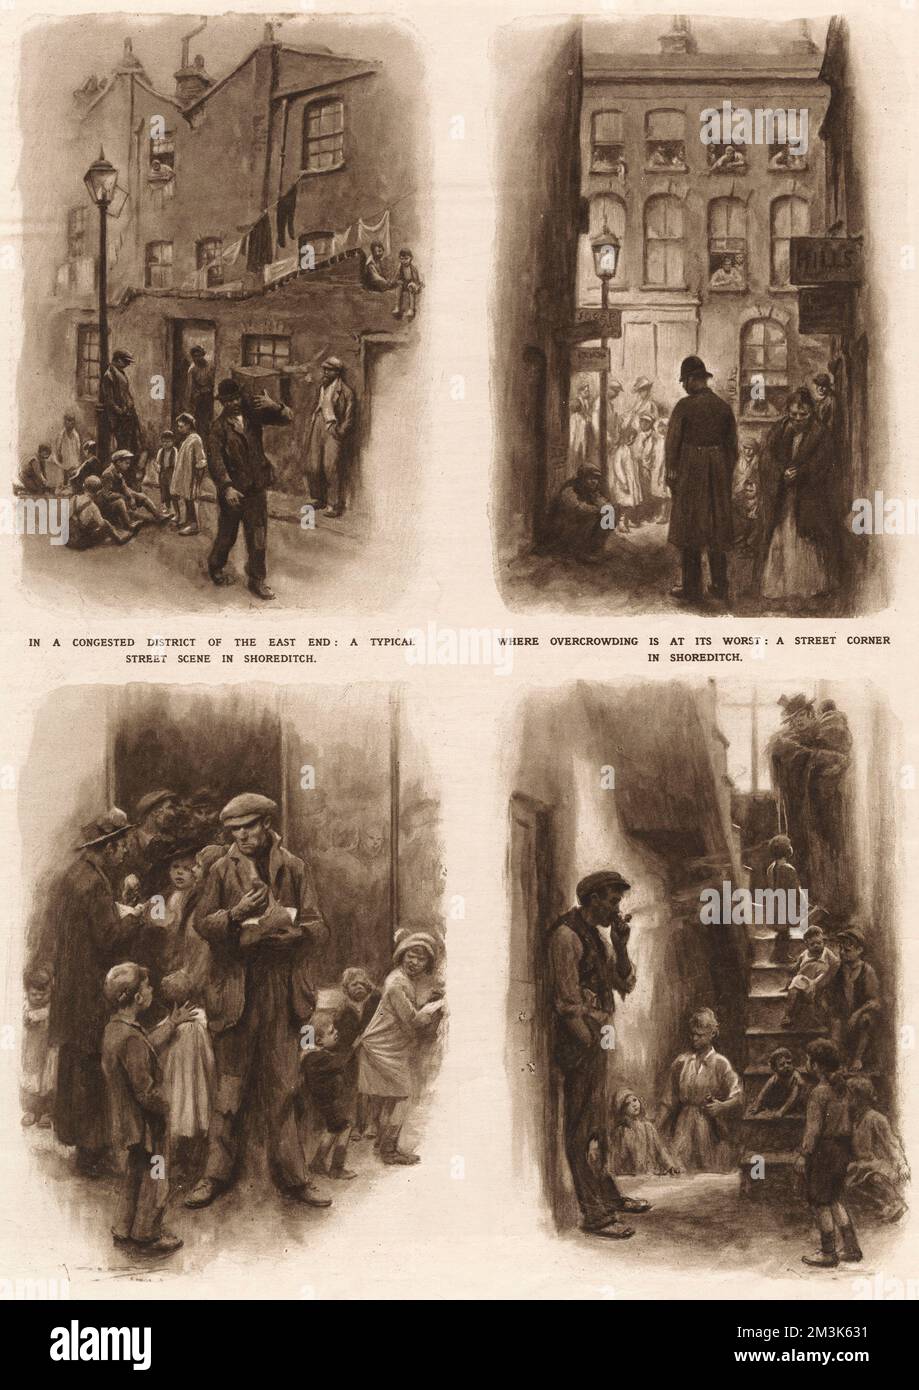 Congestion in Shoreditch and Whitechapel where the housing problem was most acute. Included are a congested street in Shoreditch, a street corner in Shoreditch, a fried-fish shop or the 'communal dining room' of these overcrowded areas and a staircase in a house in Whitechapel.  1919 Stock Photo